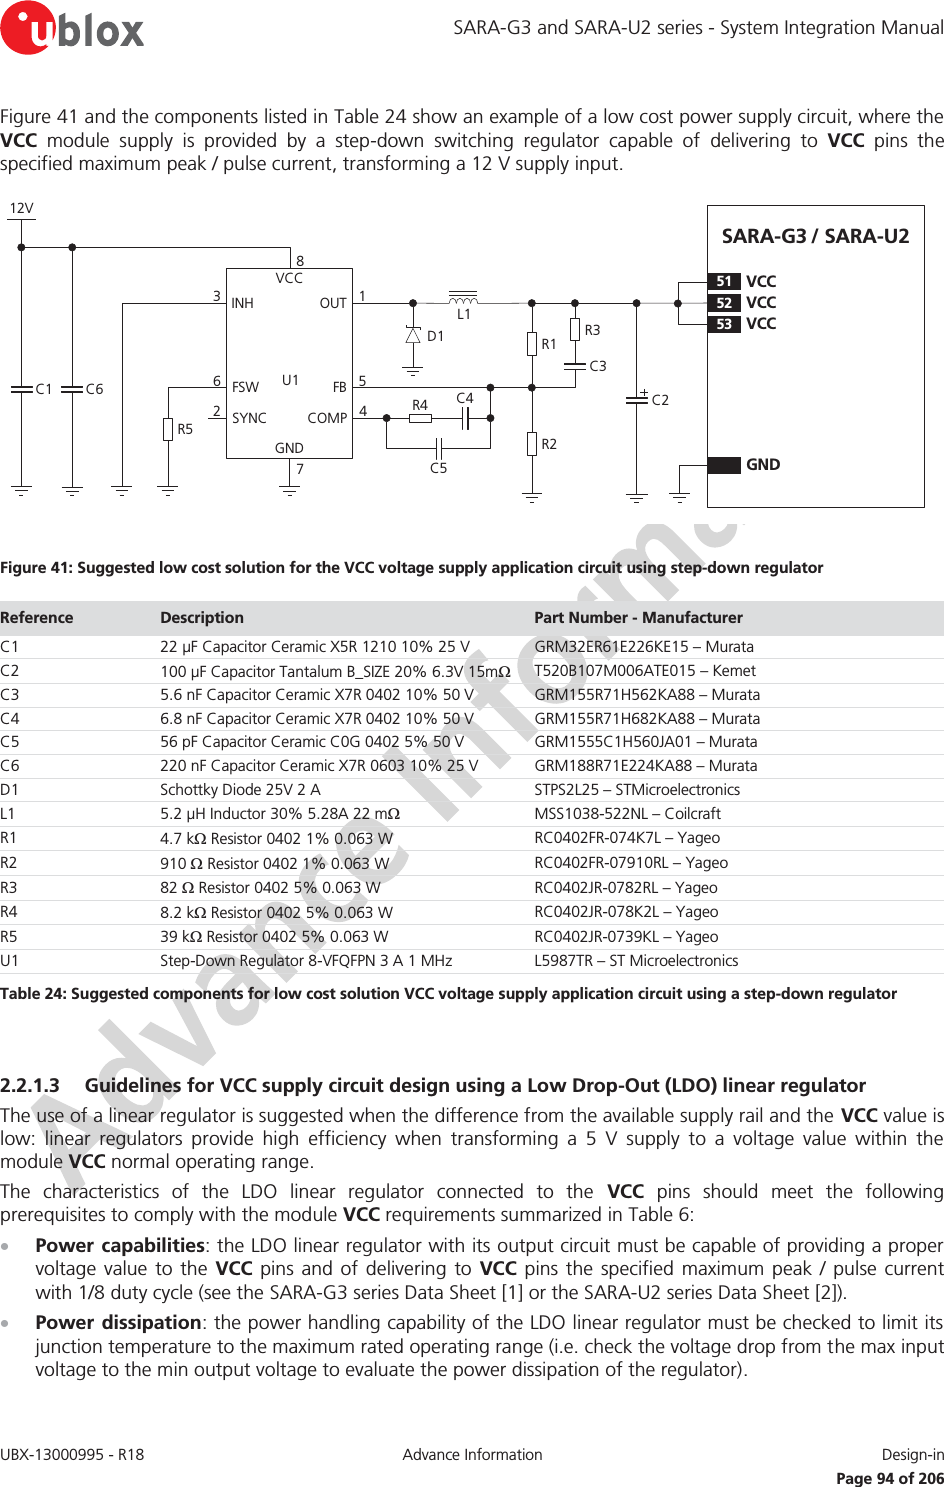 SARA-G3 and SARA-U2 series - System Integration Manual UBX-13000995 - R18  Advance Information  Design-in   Page 94 of 206 Figure 41 and the components listed in Table 24 show an example of a low cost power supply circuit, where the VCC module supply is provided by a step-down switching regulator capable of delivering to VCC pins the specified maximum peak / pulse current, transforming a 12 V supply input. SARA-G3 / SARA-U212VR5C6C1VCCINHFSWSYNCOUTGND263178C3C2D1 R1R2L1U1GNDFBCOMP54R3C4R4C552 VCC53 VCC51 VCC Figure 41: Suggested low cost solution for the VCC voltage supply application circuit using step-down regulator Reference  Description  Part Number - Manufacturer C1 22 μF Capacitor Ceramic X5R 1210 10% 25 V GRM32ER61E226KE15 – Murata C2 100 μF Capacitor Tantalum B_SIZE 20% 6.3V 15m: T520B107M006ATE015 – Kemet C3 5.6 nF Capacitor Ceramic X7R 0402 10% 50 V GRM155R71H562KA88 – Murata C4  6.8 nF Capacitor Ceramic X7R 0402 10% 50 V GRM155R71H682KA88 – Murata C5 56 pF Capacitor Ceramic C0G 0402 5% 50 V GRM1555C1H560JA01 – Murata C6 220 nF Capacitor Ceramic X7R 0603 10% 25 V GRM188R71E224KA88 – Murata D1 Schottky Diode 25V 2 A STPS2L25 – STMicroelectronics L1 5.2 μH Inductor 30% 5.28A 22 m: MSS1038-522NL – Coilcraft R1 4.7 k: Resistor 0402 1% 0.063 W RC0402FR-074K7L – Yageo R2 910 : Resistor 0402 1% 0.063 W RC0402FR-07910RL – Yageo R3 82 : Resistor 0402 5% 0.063 W RC0402JR-0782RL – Yageo R4 8.2 k: Resistor 0402 5% 0.063 W RC0402JR-078K2L – Yageo R5 39 k: Resistor 0402 5% 0.063 W RC0402JR-0739KL – Yageo U1 Step-Down Regulator 8-VFQFPN 3 A 1 MHz L5987TR – ST Microelectronics Table 24: Suggested components for low cost solution VCC voltage supply application circuit using a step-down regulator  2.2.1.3 Guidelines for VCC supply circuit design using a Low Drop-Out (LDO) linear regulator The use of a linear regulator is suggested when the difference from the available supply rail and the VCC value is low: linear regulators provide high efficiency when transforming a 5 V supply to a voltage value within the module VCC normal operating range. The characteristics of the LDO linear regulator connected to the VCC pins should meet the following prerequisites to comply with the module VCC requirements summarized in Table 6: x Power capabilities: the LDO linear regulator with its output circuit must be capable of providing a proper voltage value to the VCC pins and of delivering to VCC pins the specified maximum peak / pulse current with 1/8 duty cycle (see the SARA-G3 series Data Sheet [1] or the SARA-U2 series Data Sheet [2]). x Power dissipation: the power handling capability of the LDO linear regulator must be checked to limit its junction temperature to the maximum rated operating range (i.e. check the voltage drop from the max input voltage to the min output voltage to evaluate the power dissipation of the regulator). 